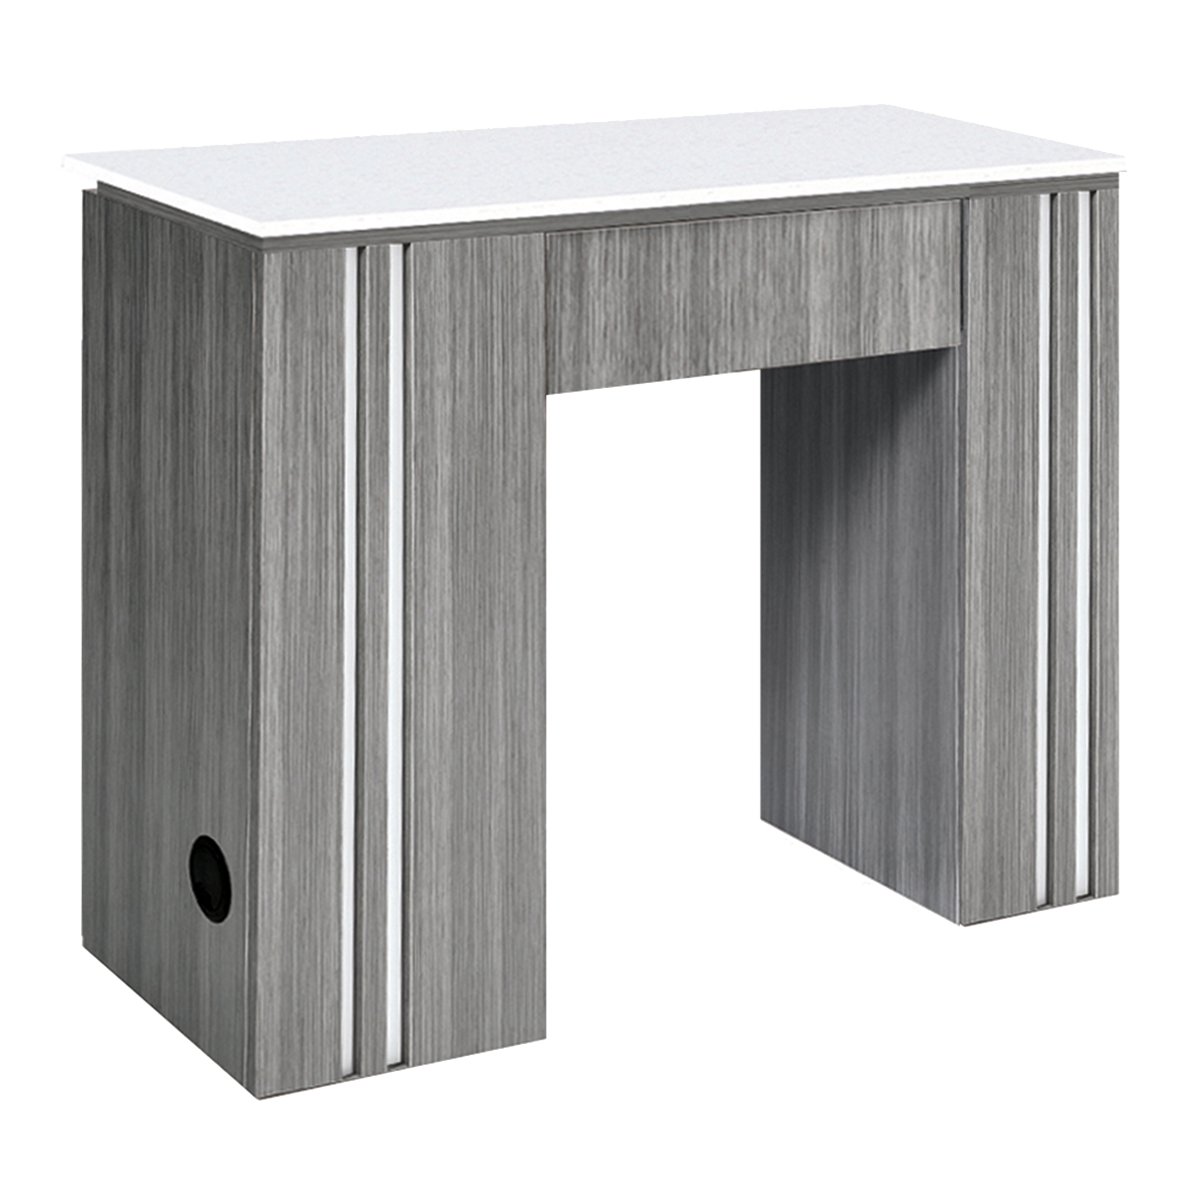 Whale Spa Gray Manicure Table NM901 Nail Salon Table with Drawers, Quartz Countertop | Salon and Spa Furniture